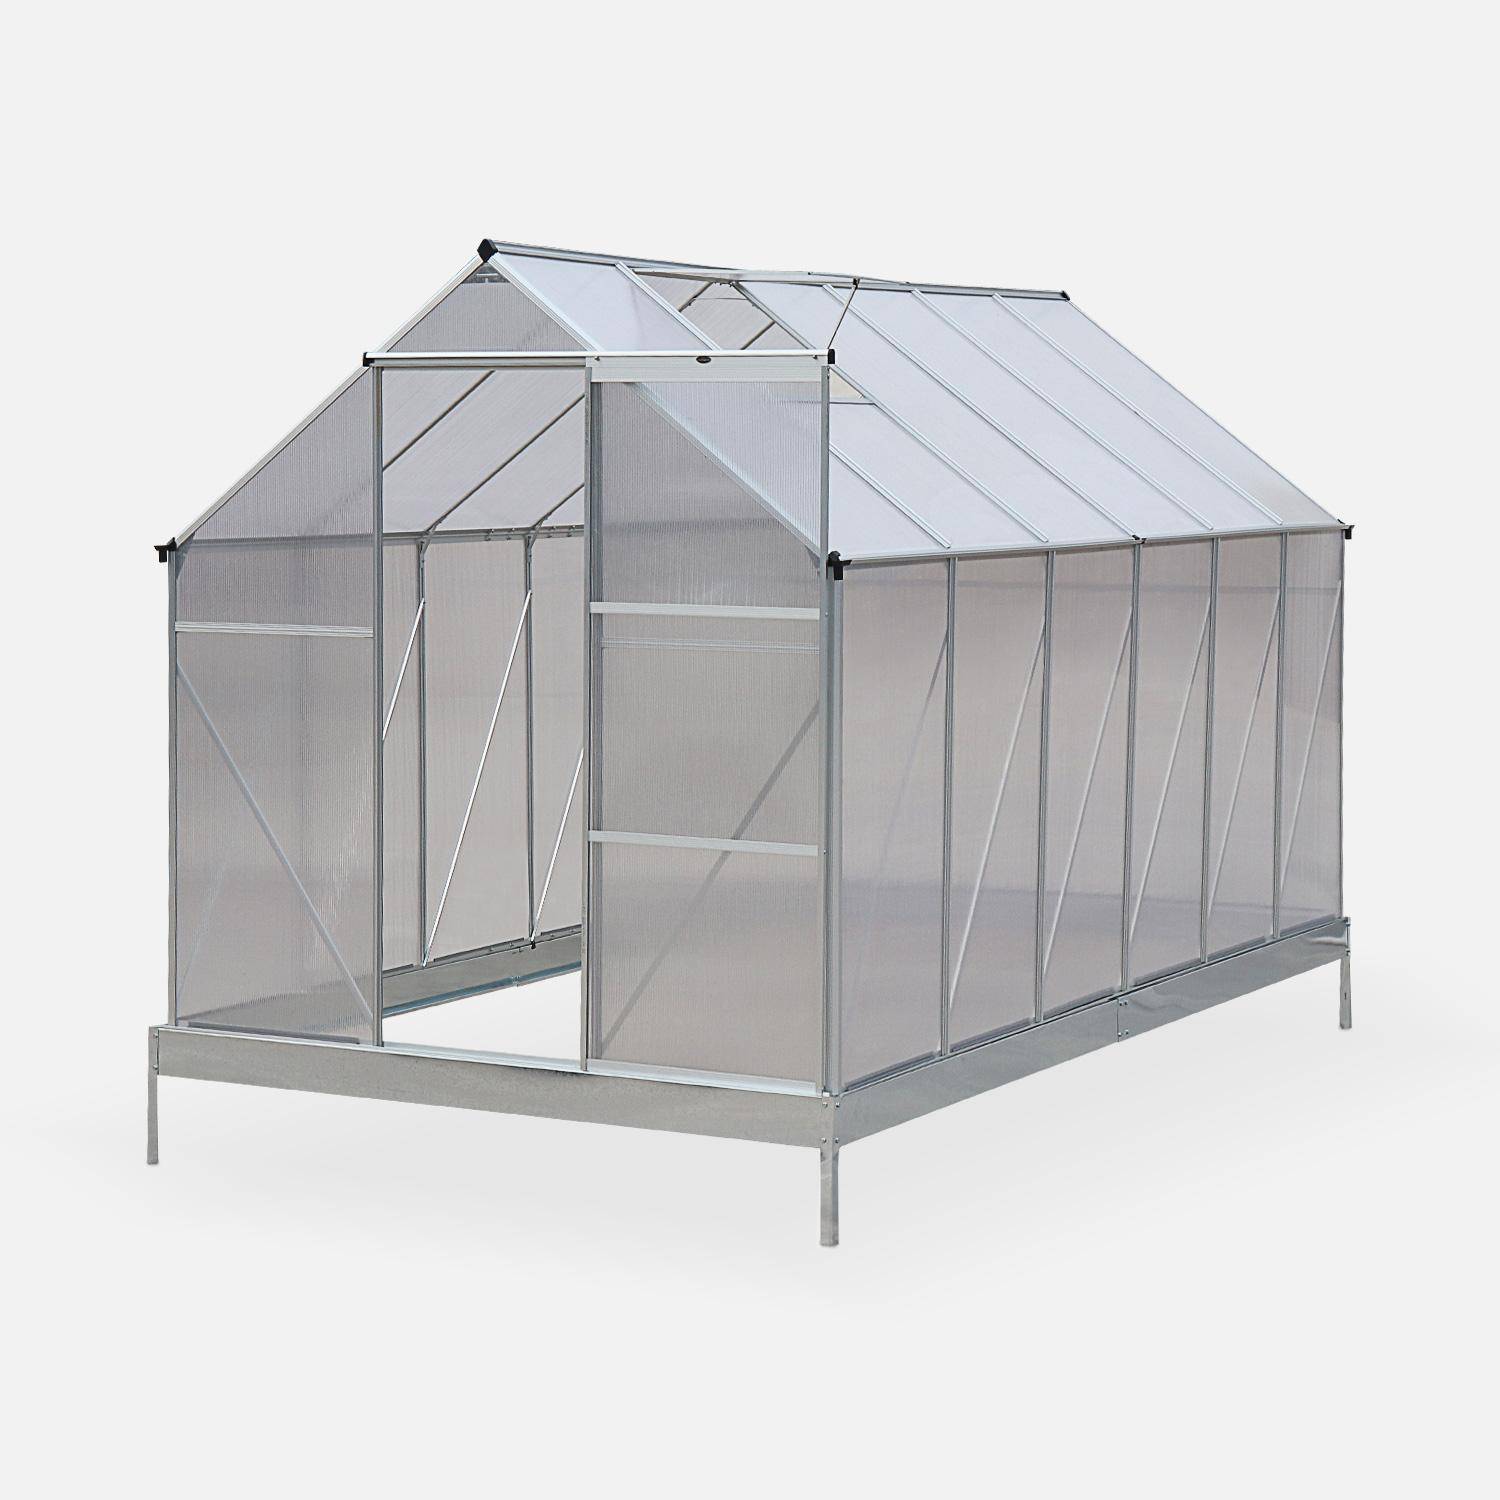 7m², 14x7FT polycarbonate (4mm) greenhouse with base frame - 2 skylights, gutter - Sapin - Grey,sweeek,Photo2